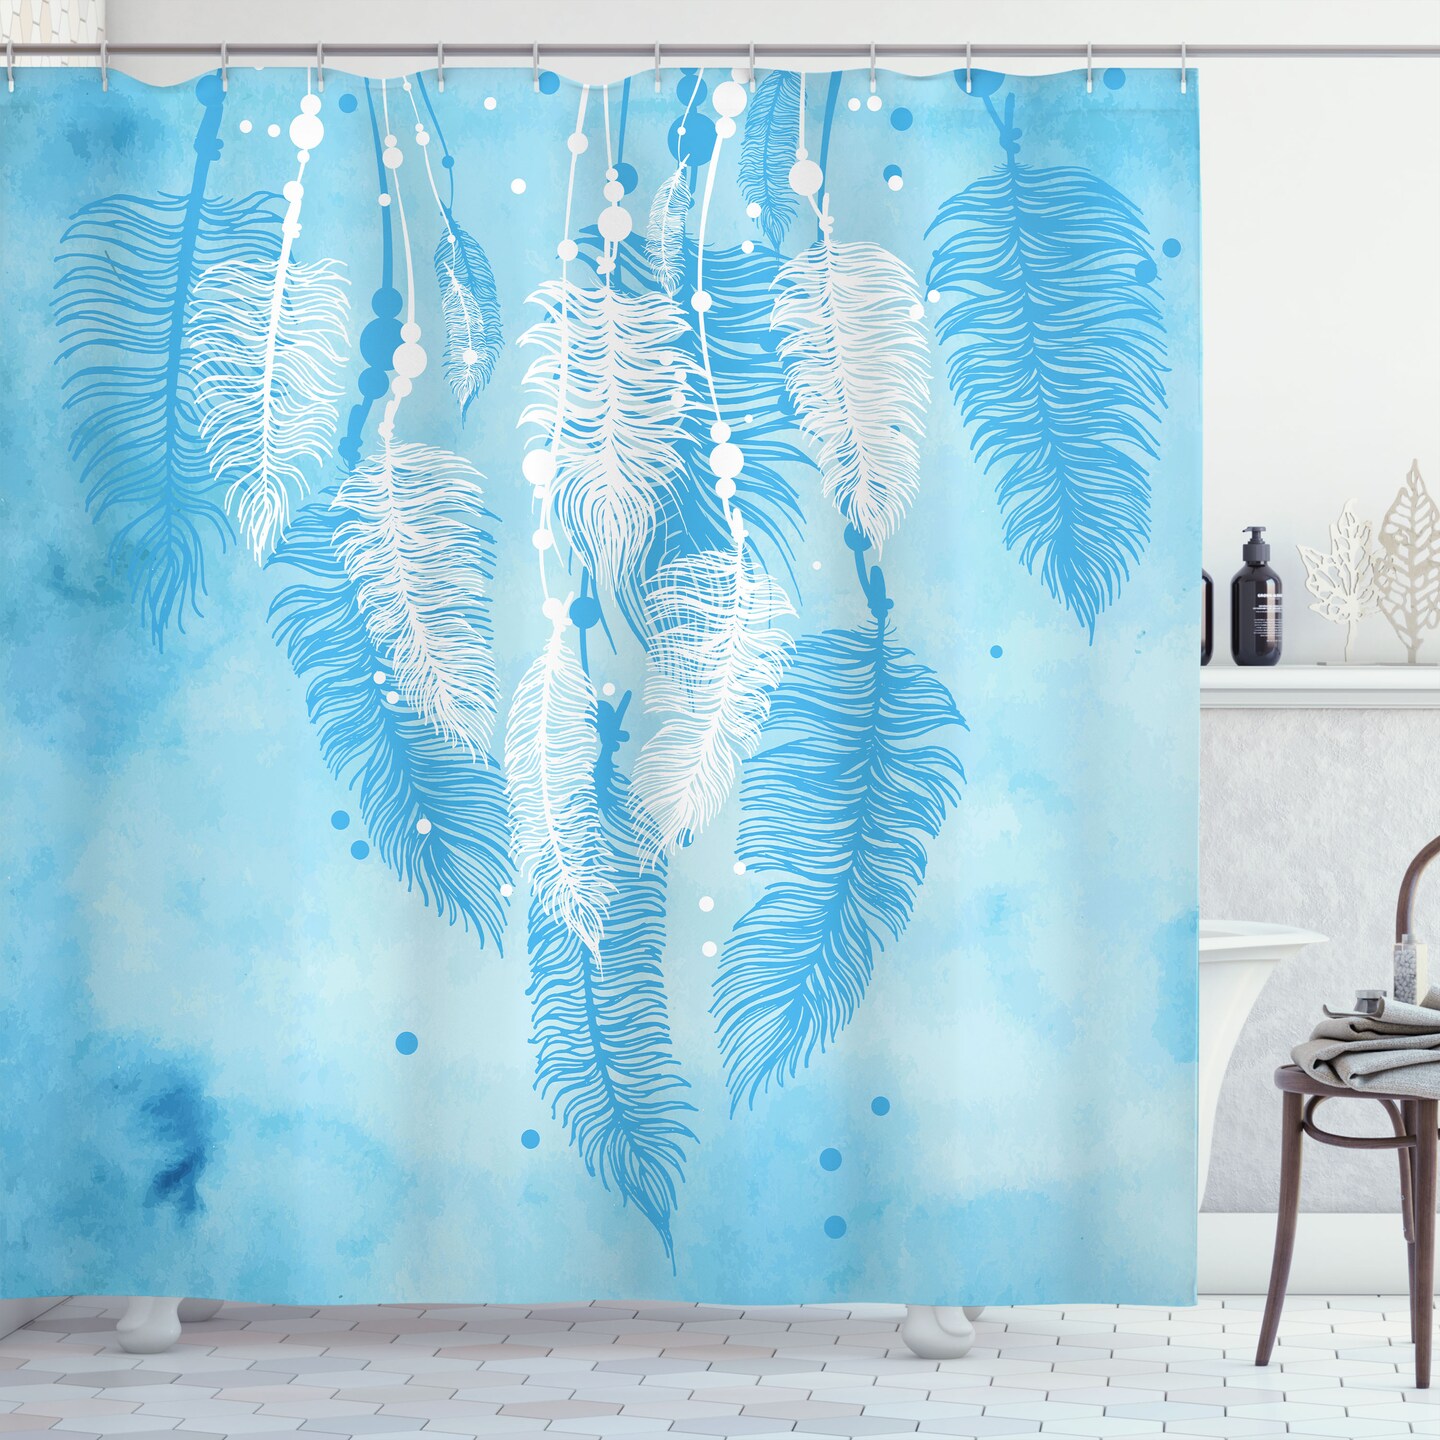 Ambesonne Tribal Shower Curtain, Watercolors Style Digital Made